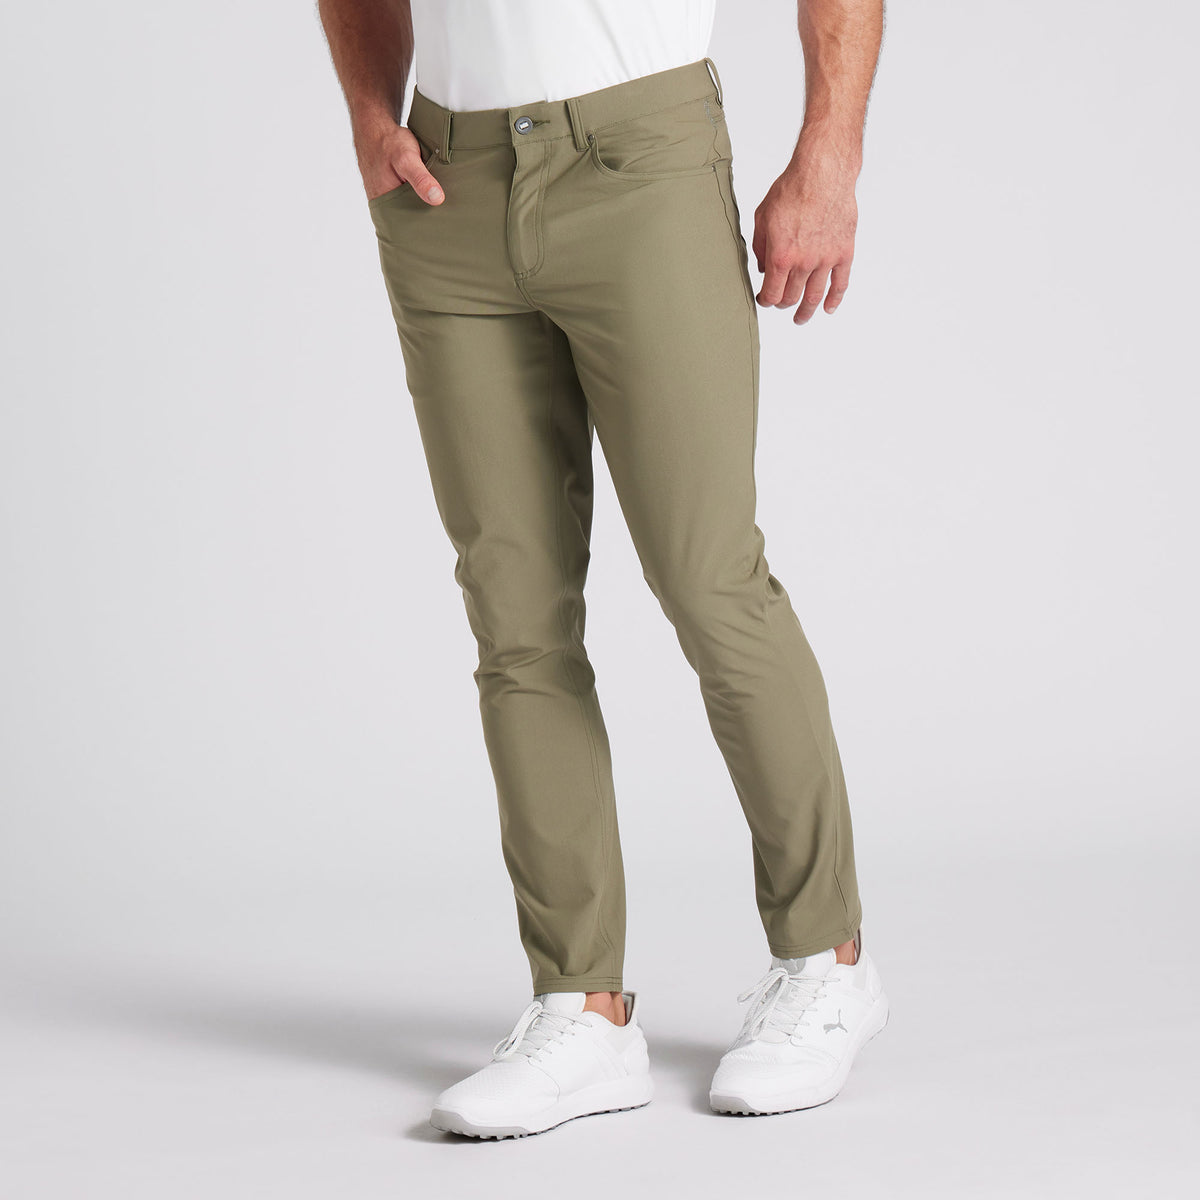 z3 Black 5 Pocket Tailored Fit Pants With '4 Way' Stretch